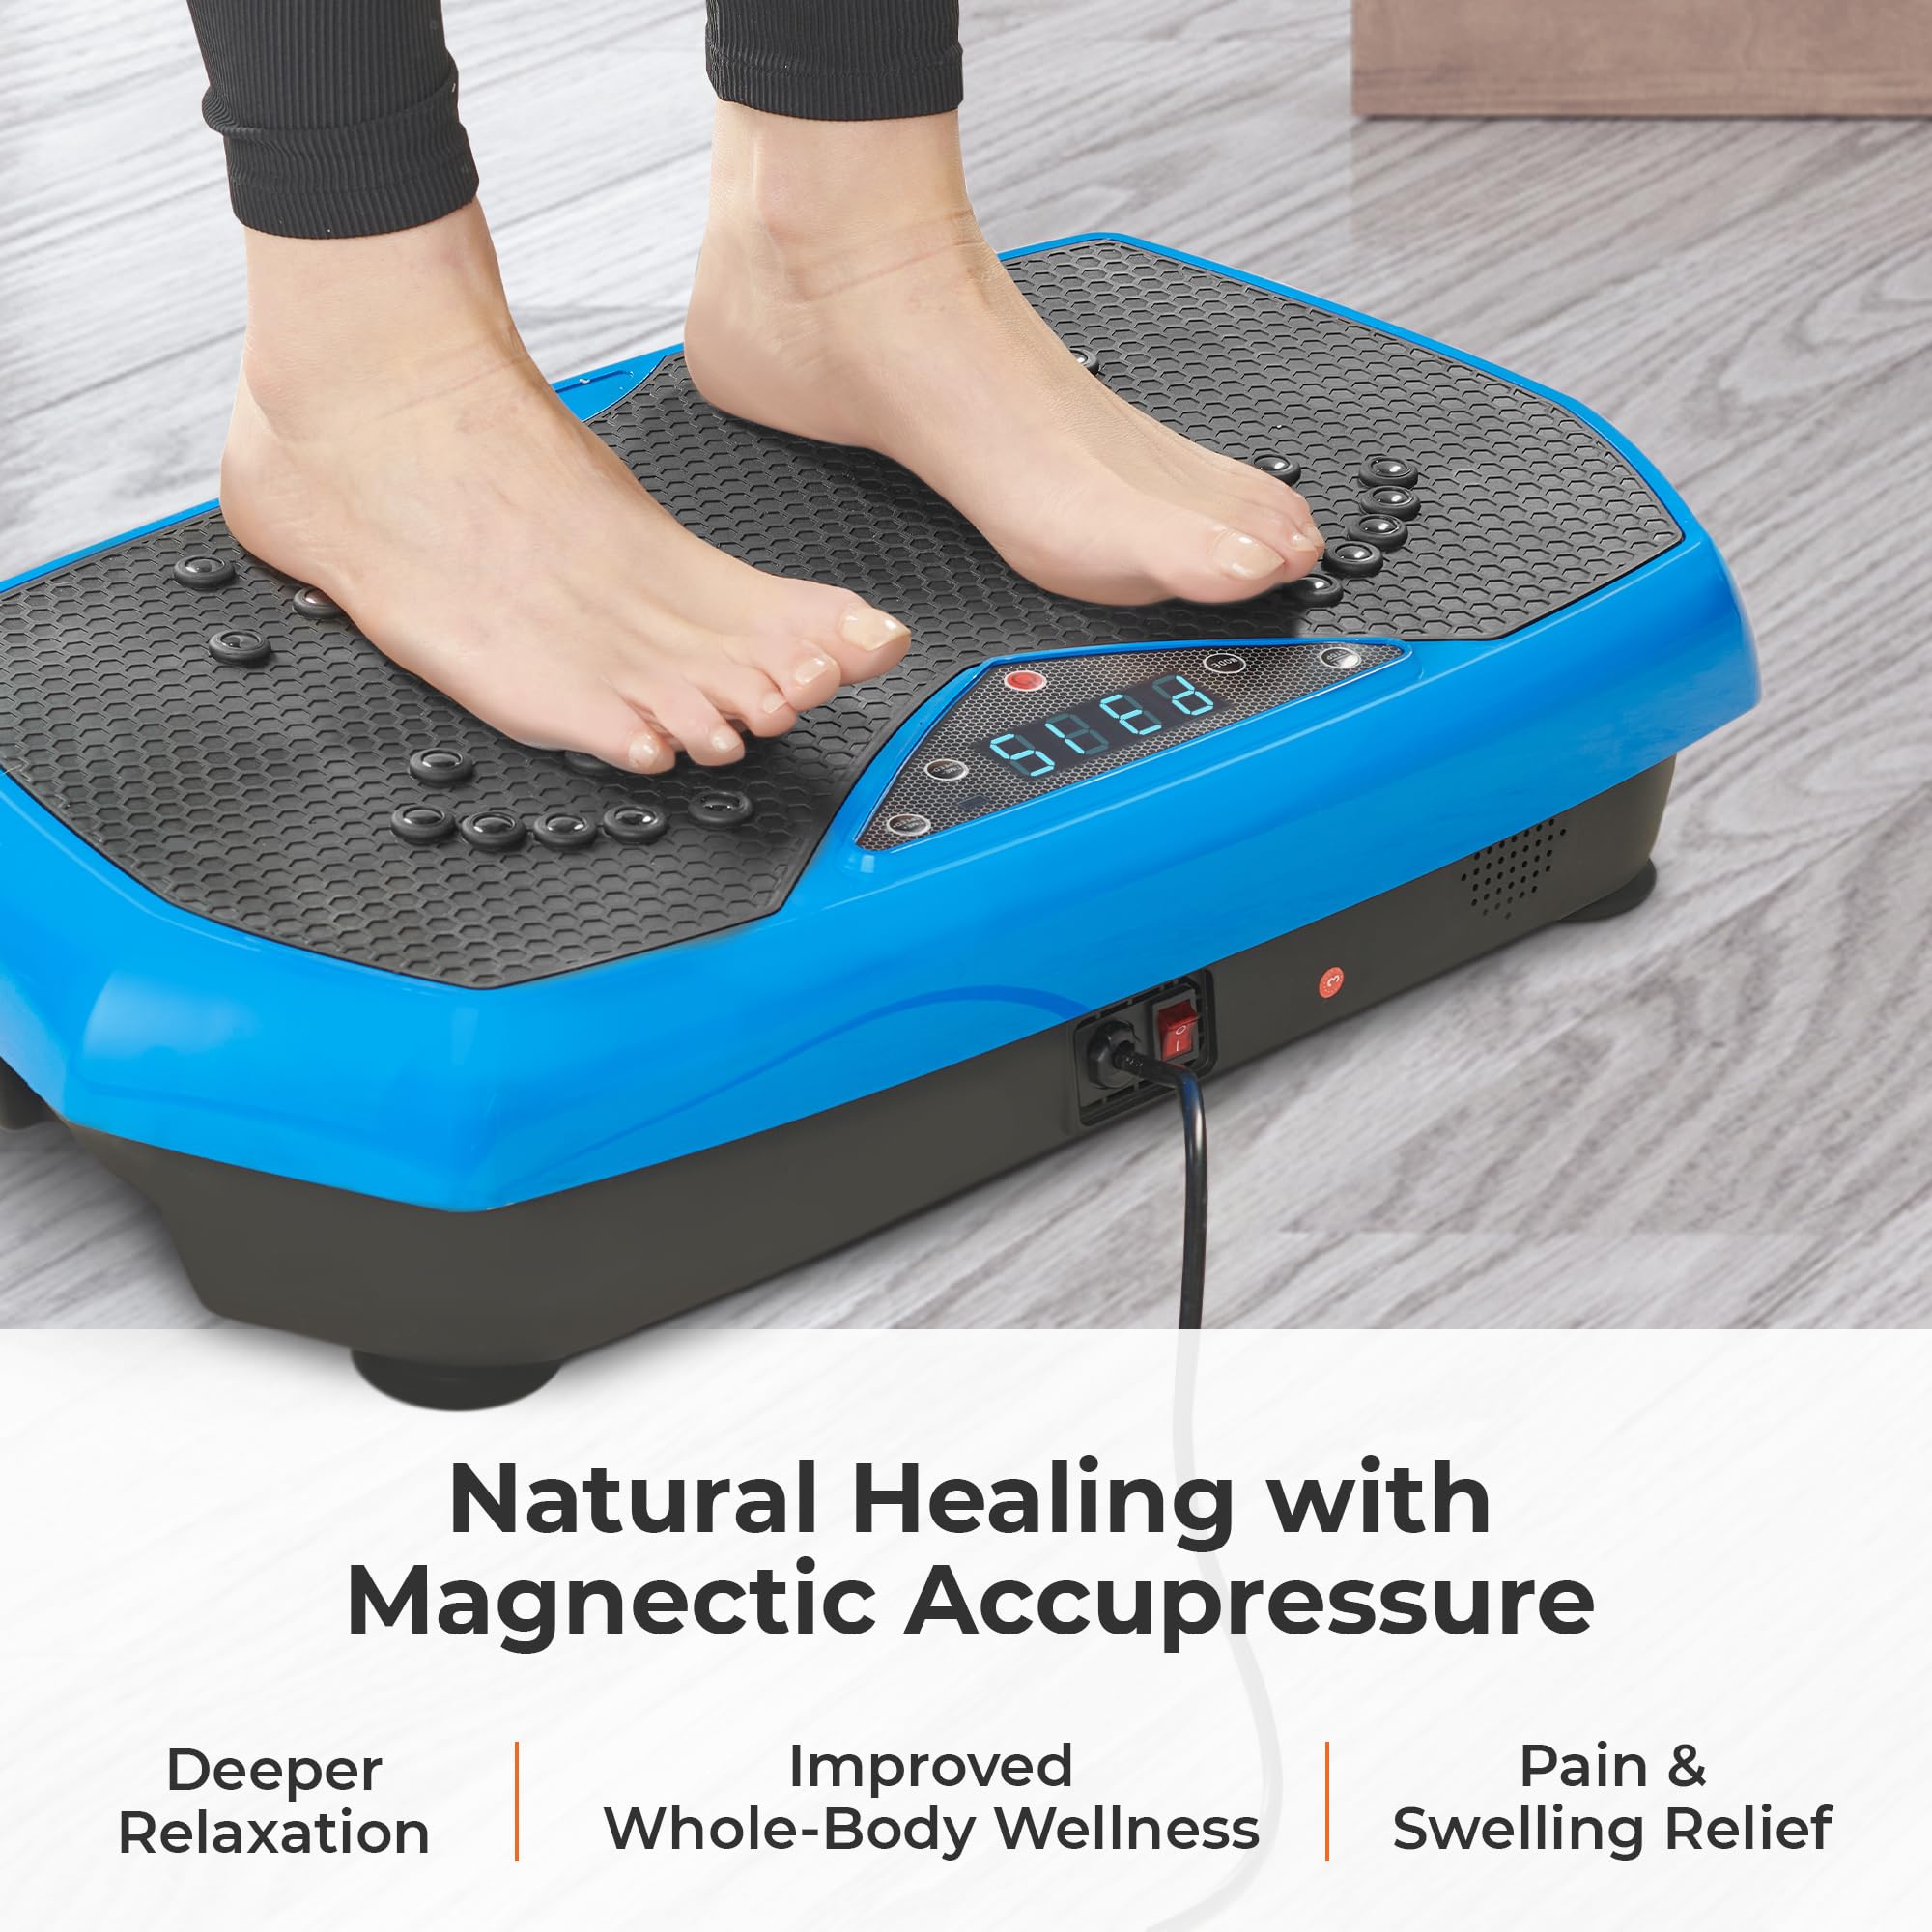 Lifepro Acupressure Vibration Plate Platform Exercise Machine, Burn More Calories & Alleviate Back & Joint Pain at Home with a Whole Body Vibration Plate Exercise Machine Lymphatic Drainage Stimulator